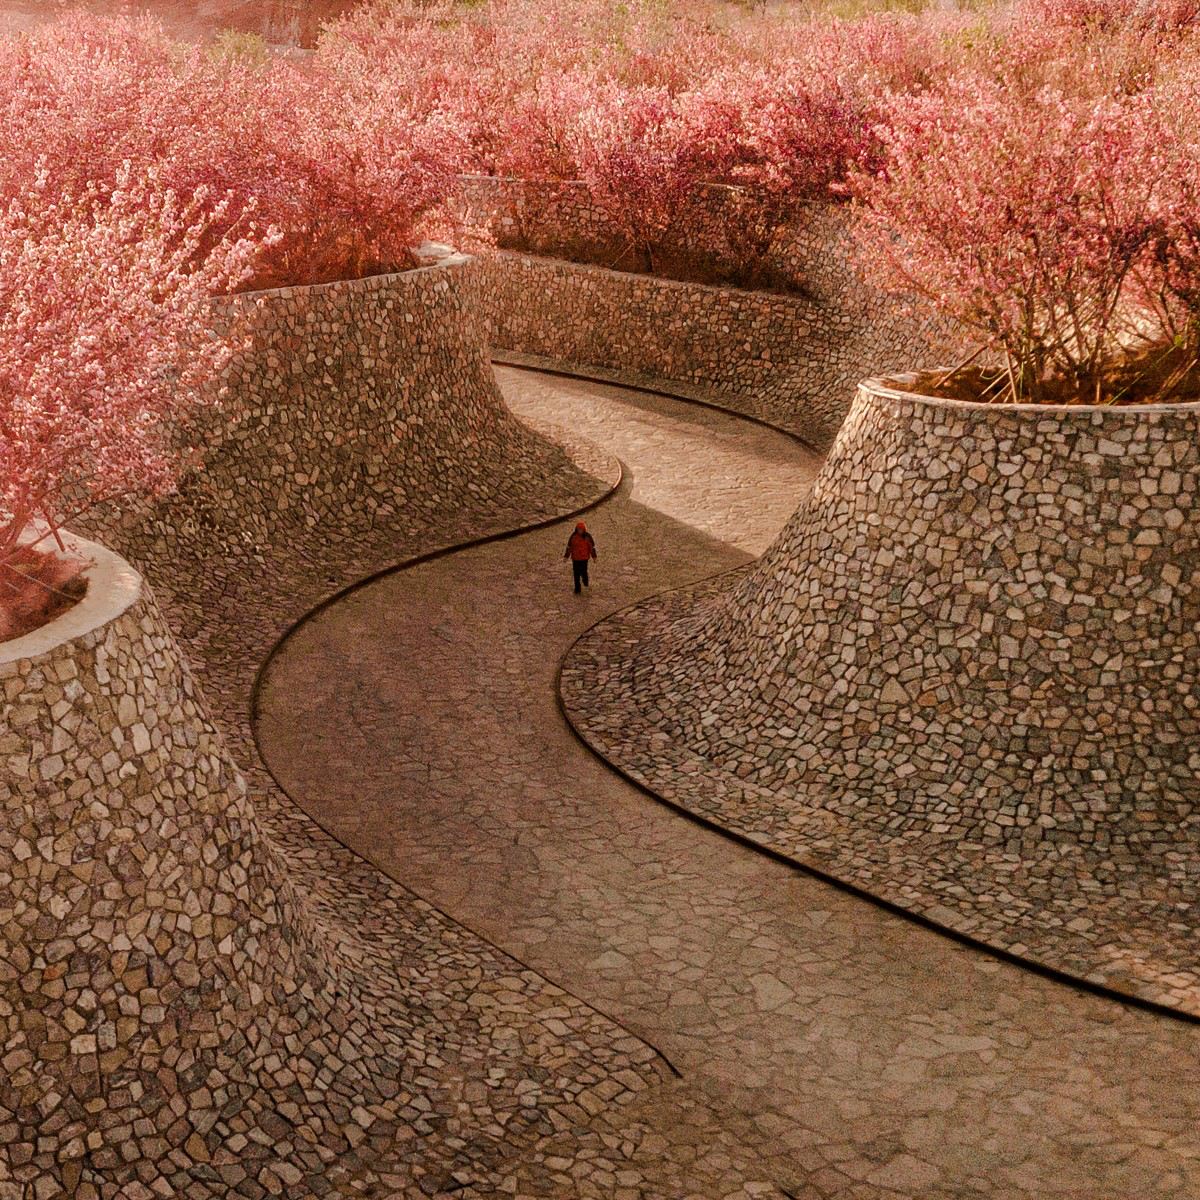 Hu Sun wins Golden at the prestigious A' Landscape Planning and Garden Design Award with Rizhao Bailuwan Cherry Blossom Town Art and Cultural Space.